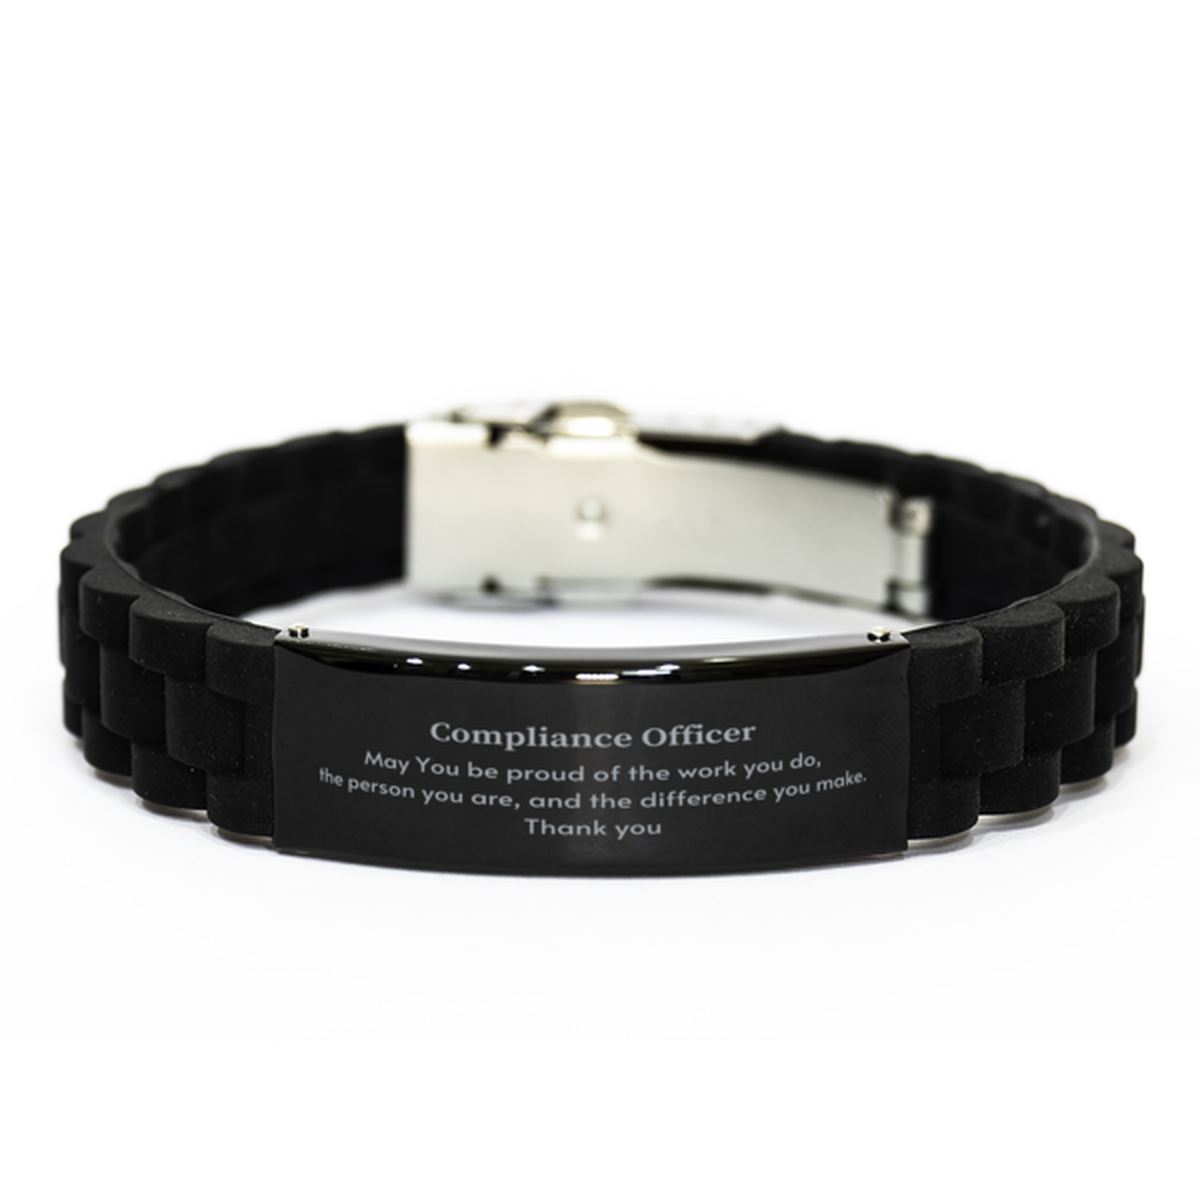 Heartwarming Black Glidelock Clasp Bracelet Retirement Coworkers Gifts for Compliance Officer, Compliance Officer May You be proud of the work you do, the person you are Gifts for Boss Men Women Friends